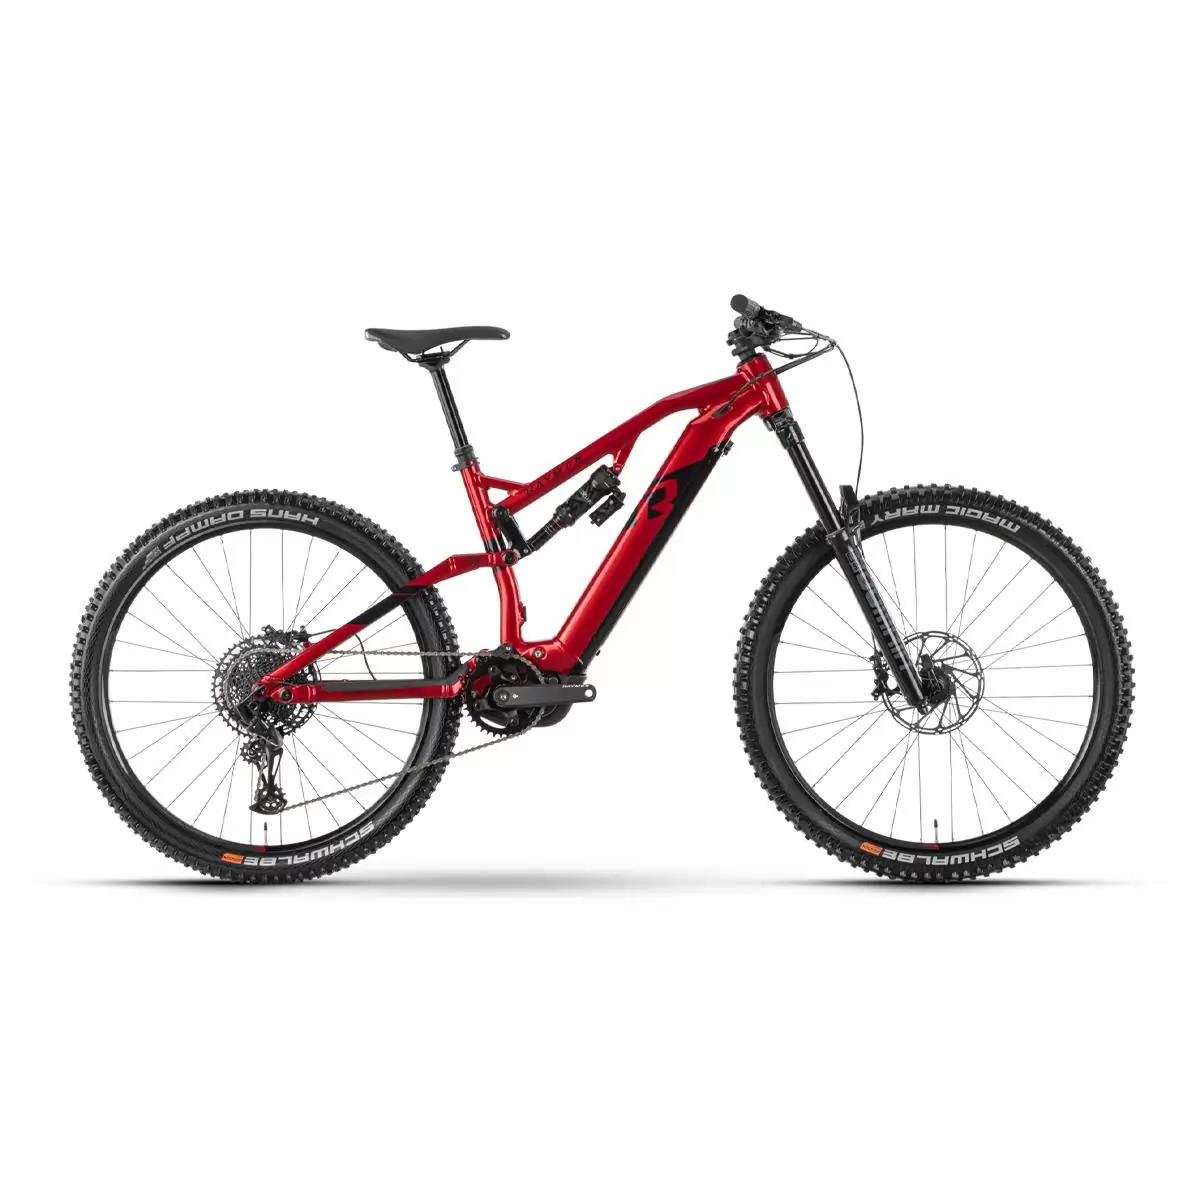 TrailRay 160E 10.0 29'' 170mm 12s 720Wh Yamaha PW-X3 Red/Black Size M #1